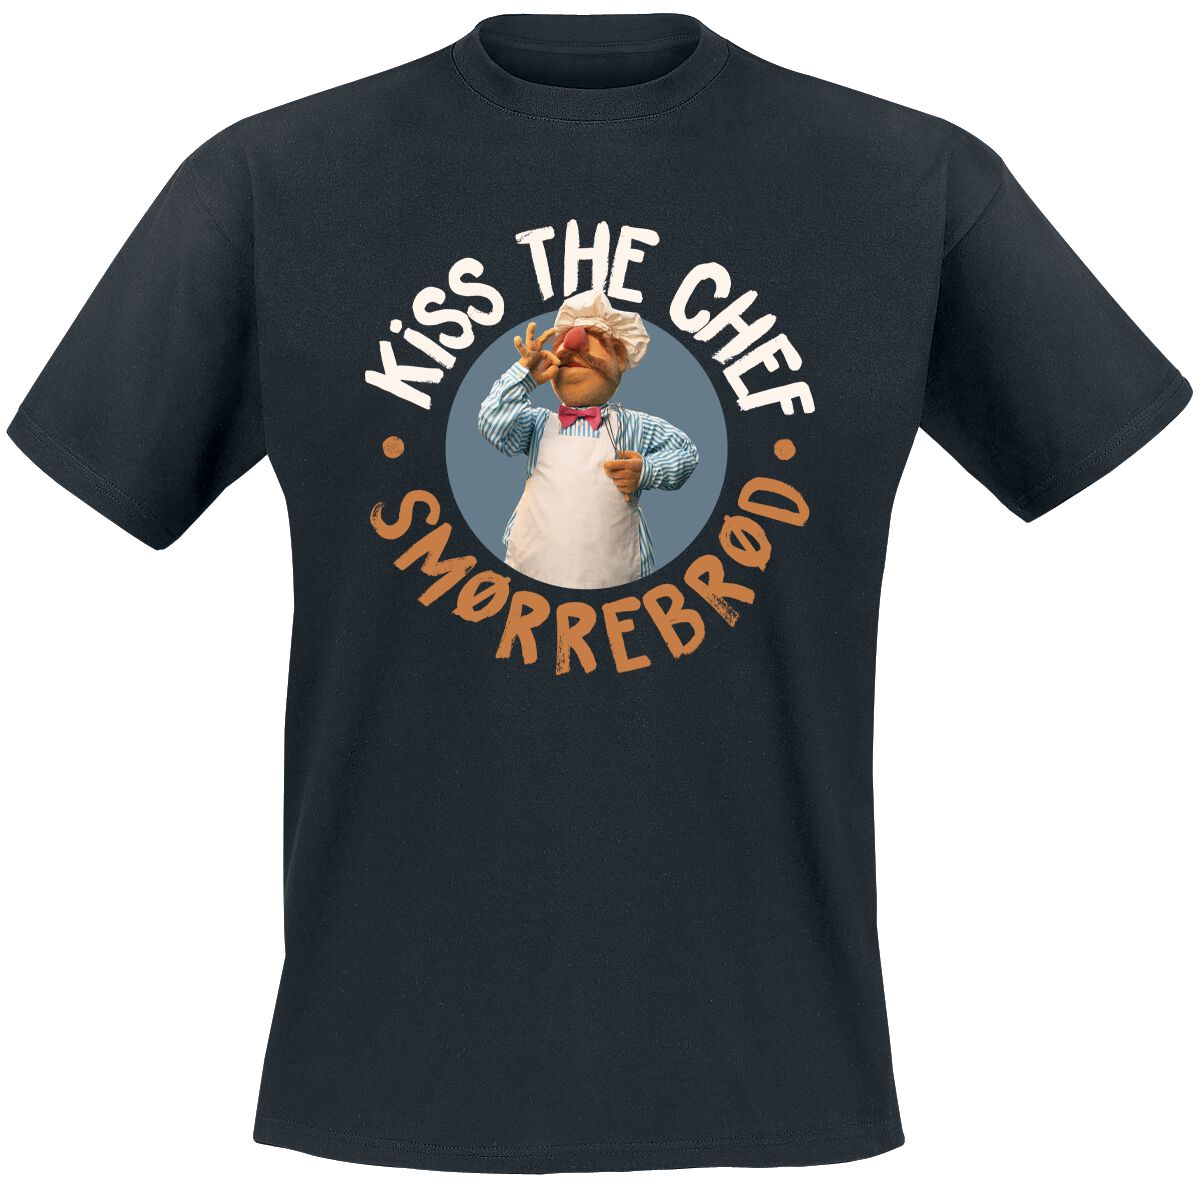 Die Muppets Kiss The Chef - Smorrebrod T-Shirt schwarz in L